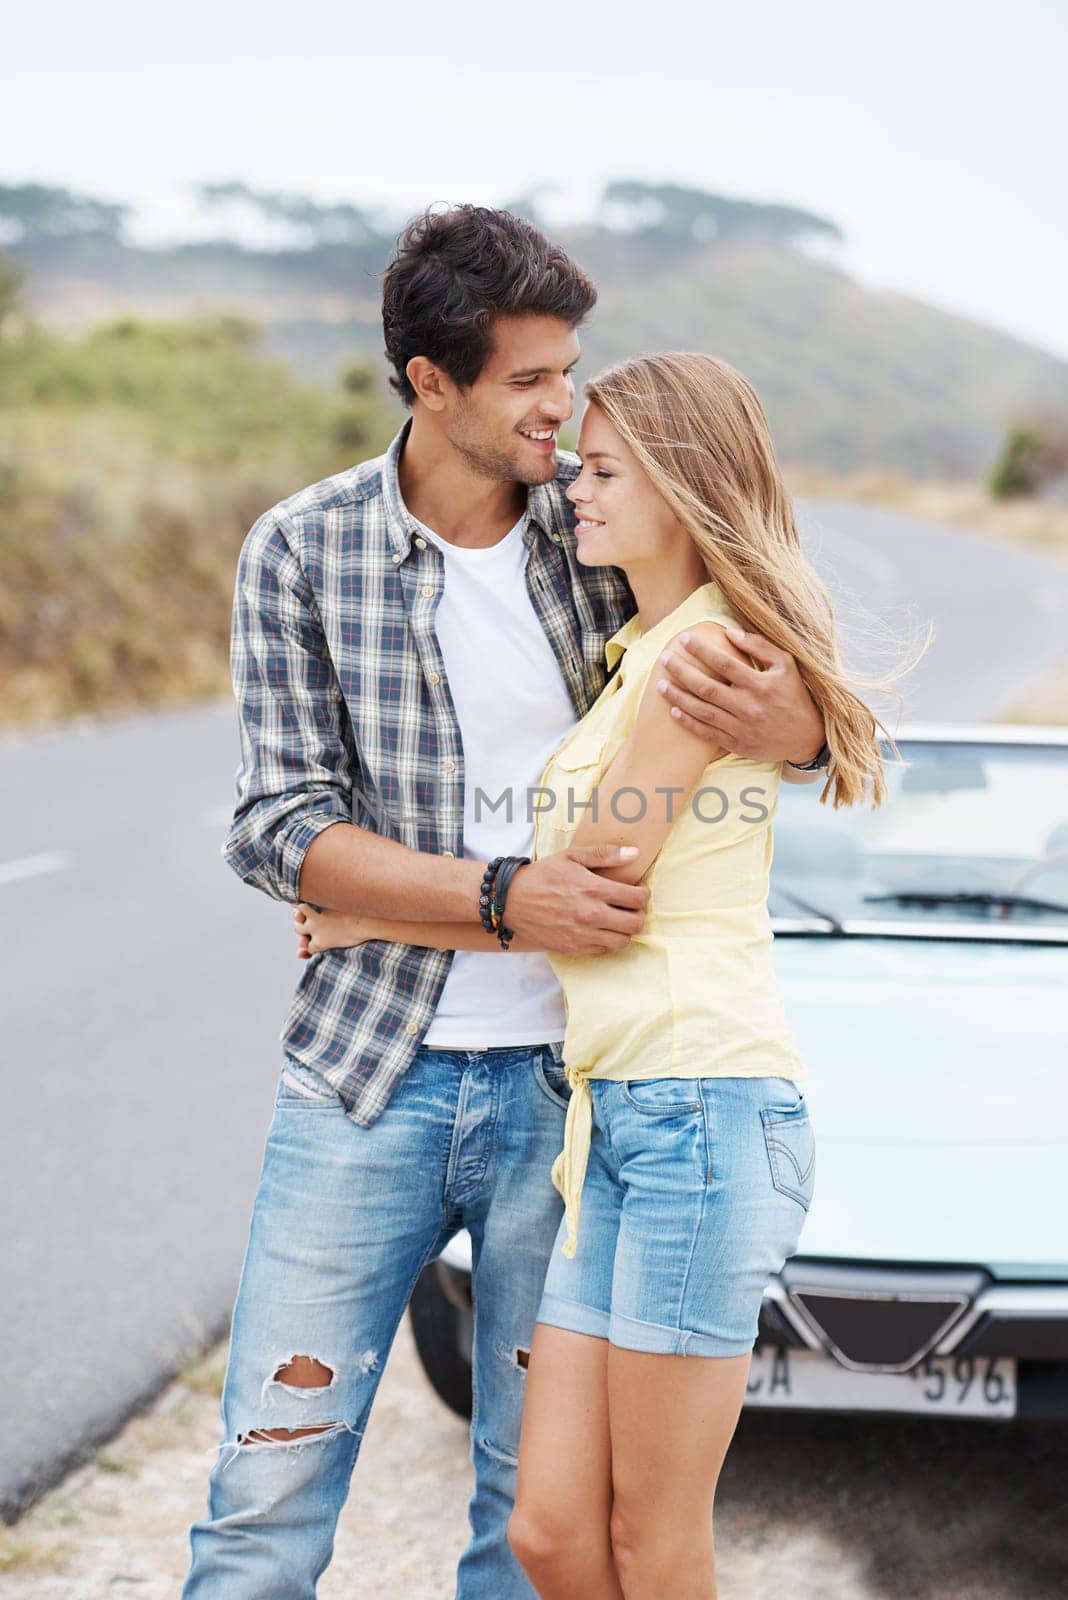 Enjoying their relationship. A romantic young couple standing alongside their convertible while on a roadtrip. by YuriArcurs